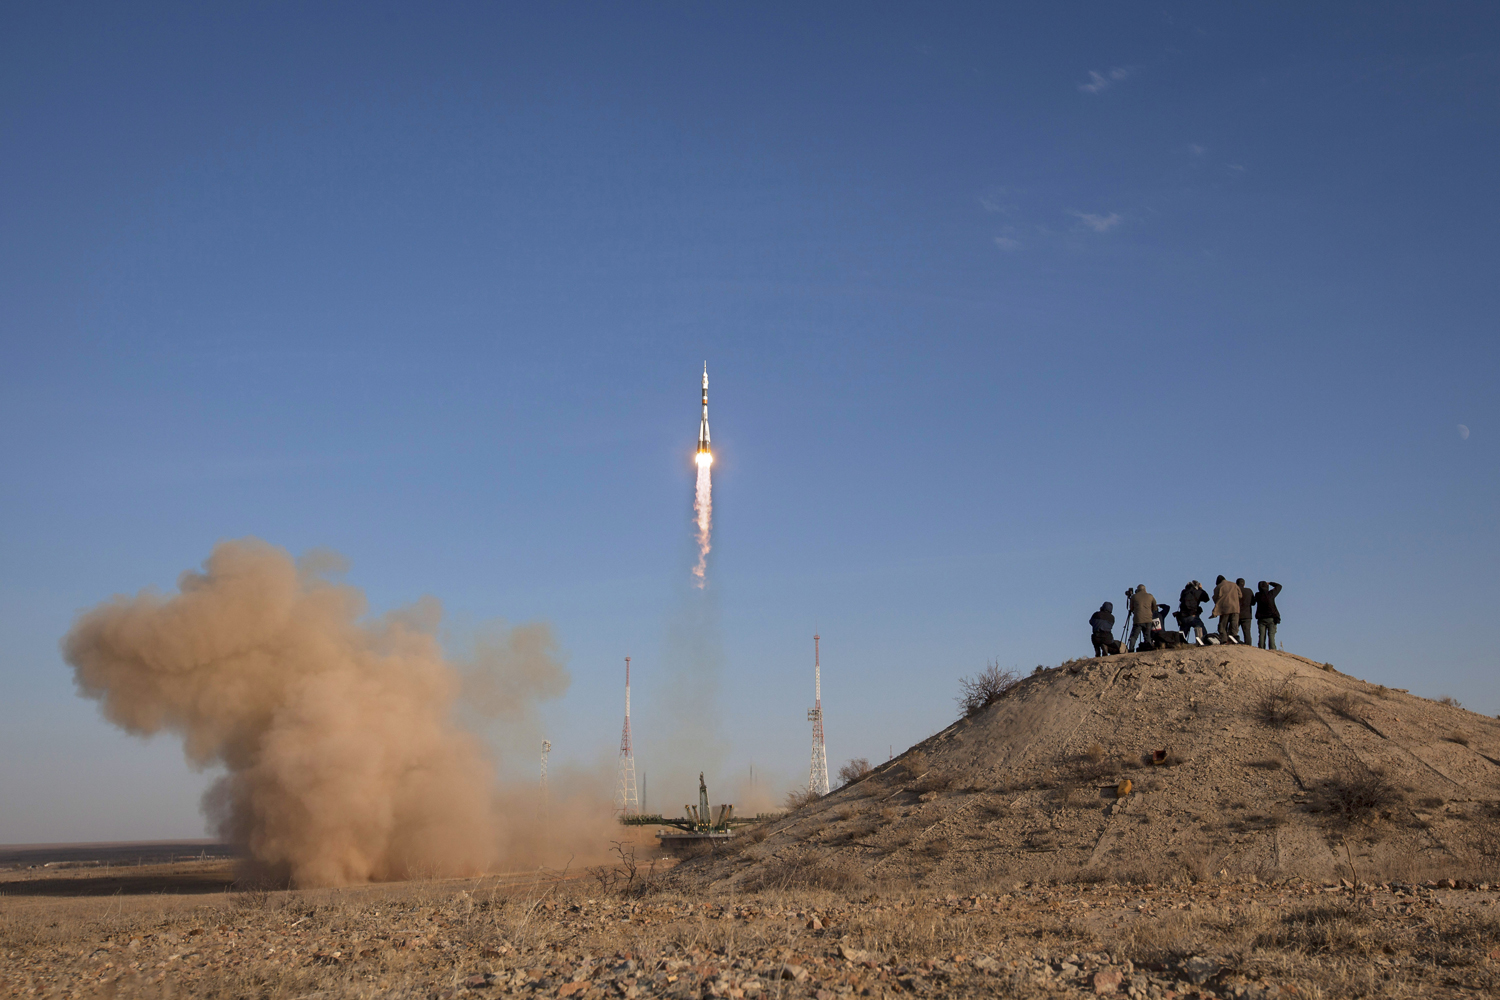 Image: Oct. 23, 2012. Members of the media photograph the Soyuz rocket as it launches in Baikonur, Kazakhstan.